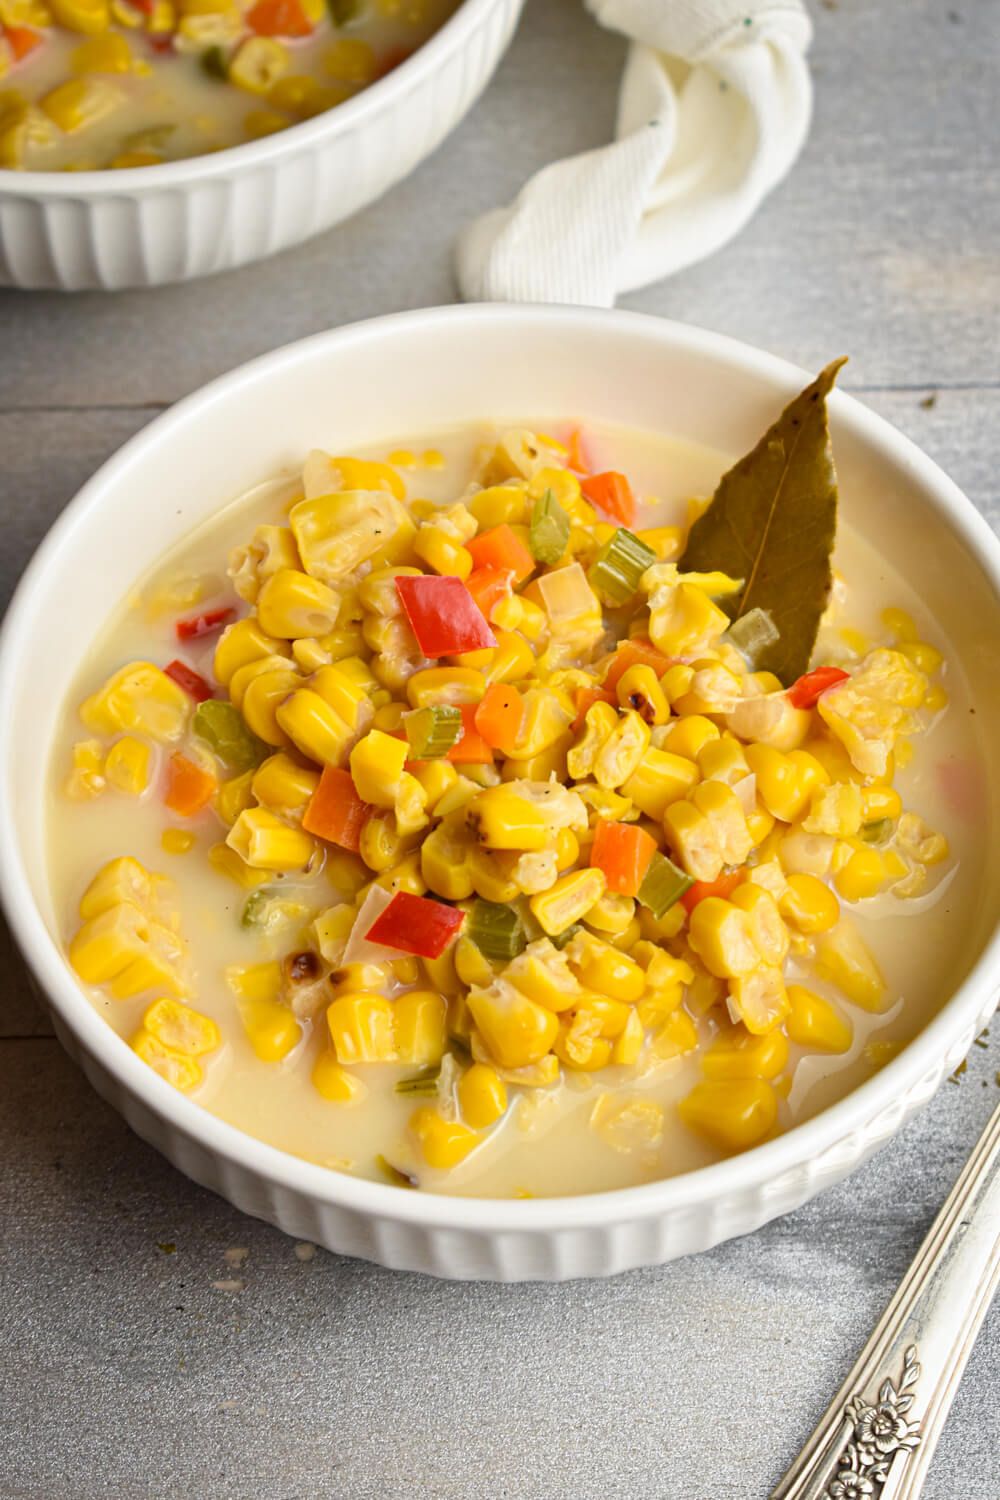 Corn chowder with roasted corn, peppers, carrots, and celery in a creamy broth.